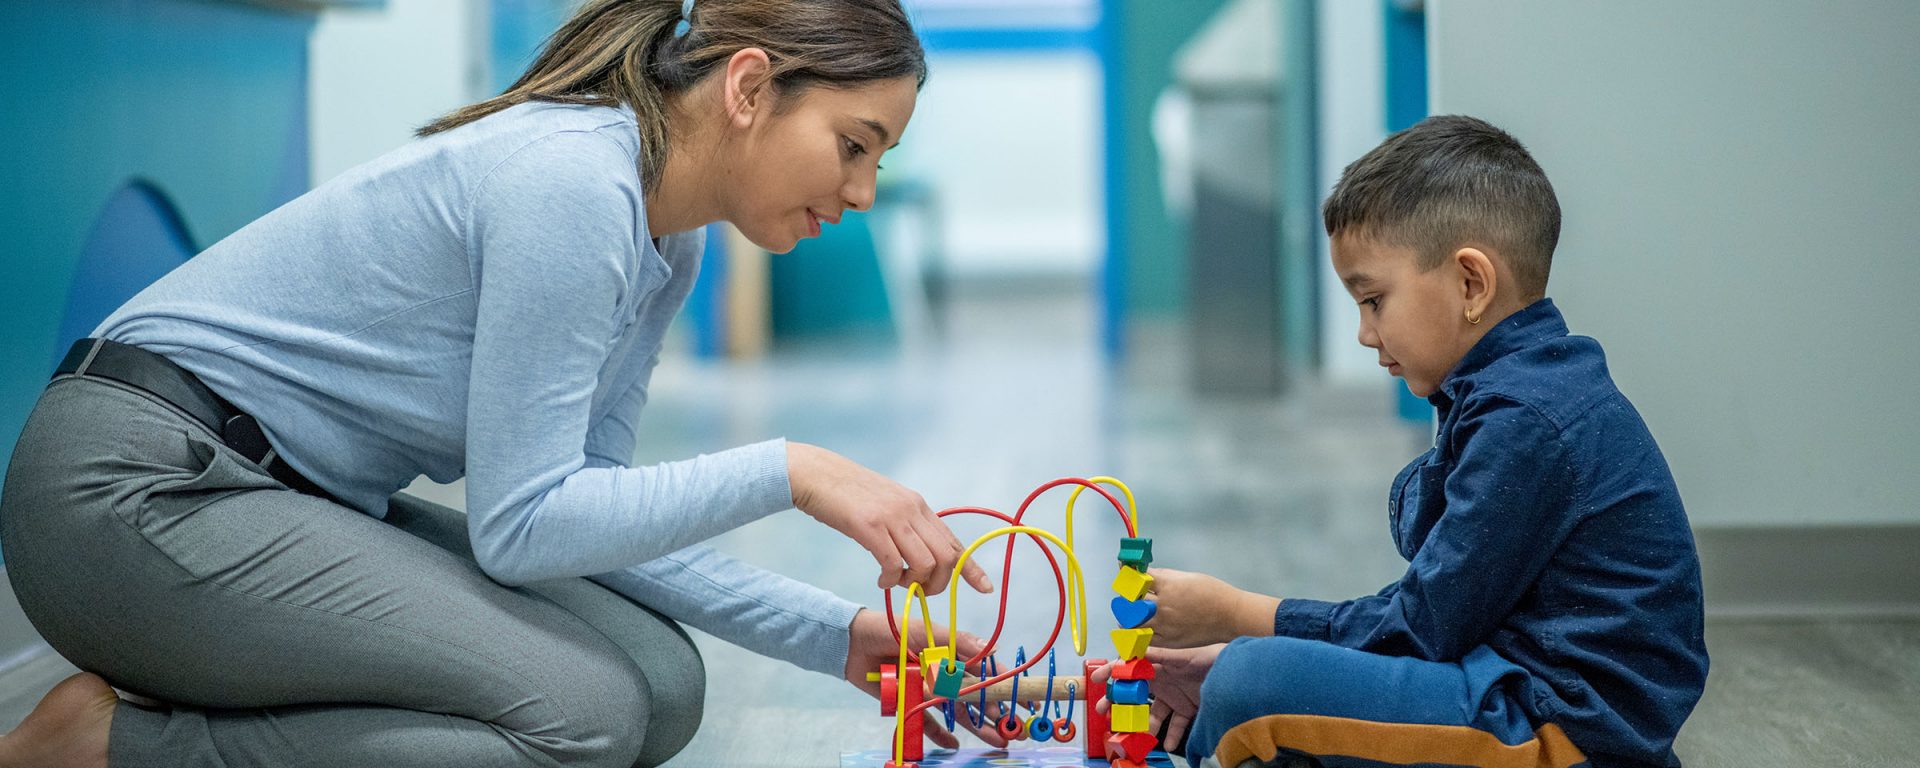 Female occupational therapist working with a child at play